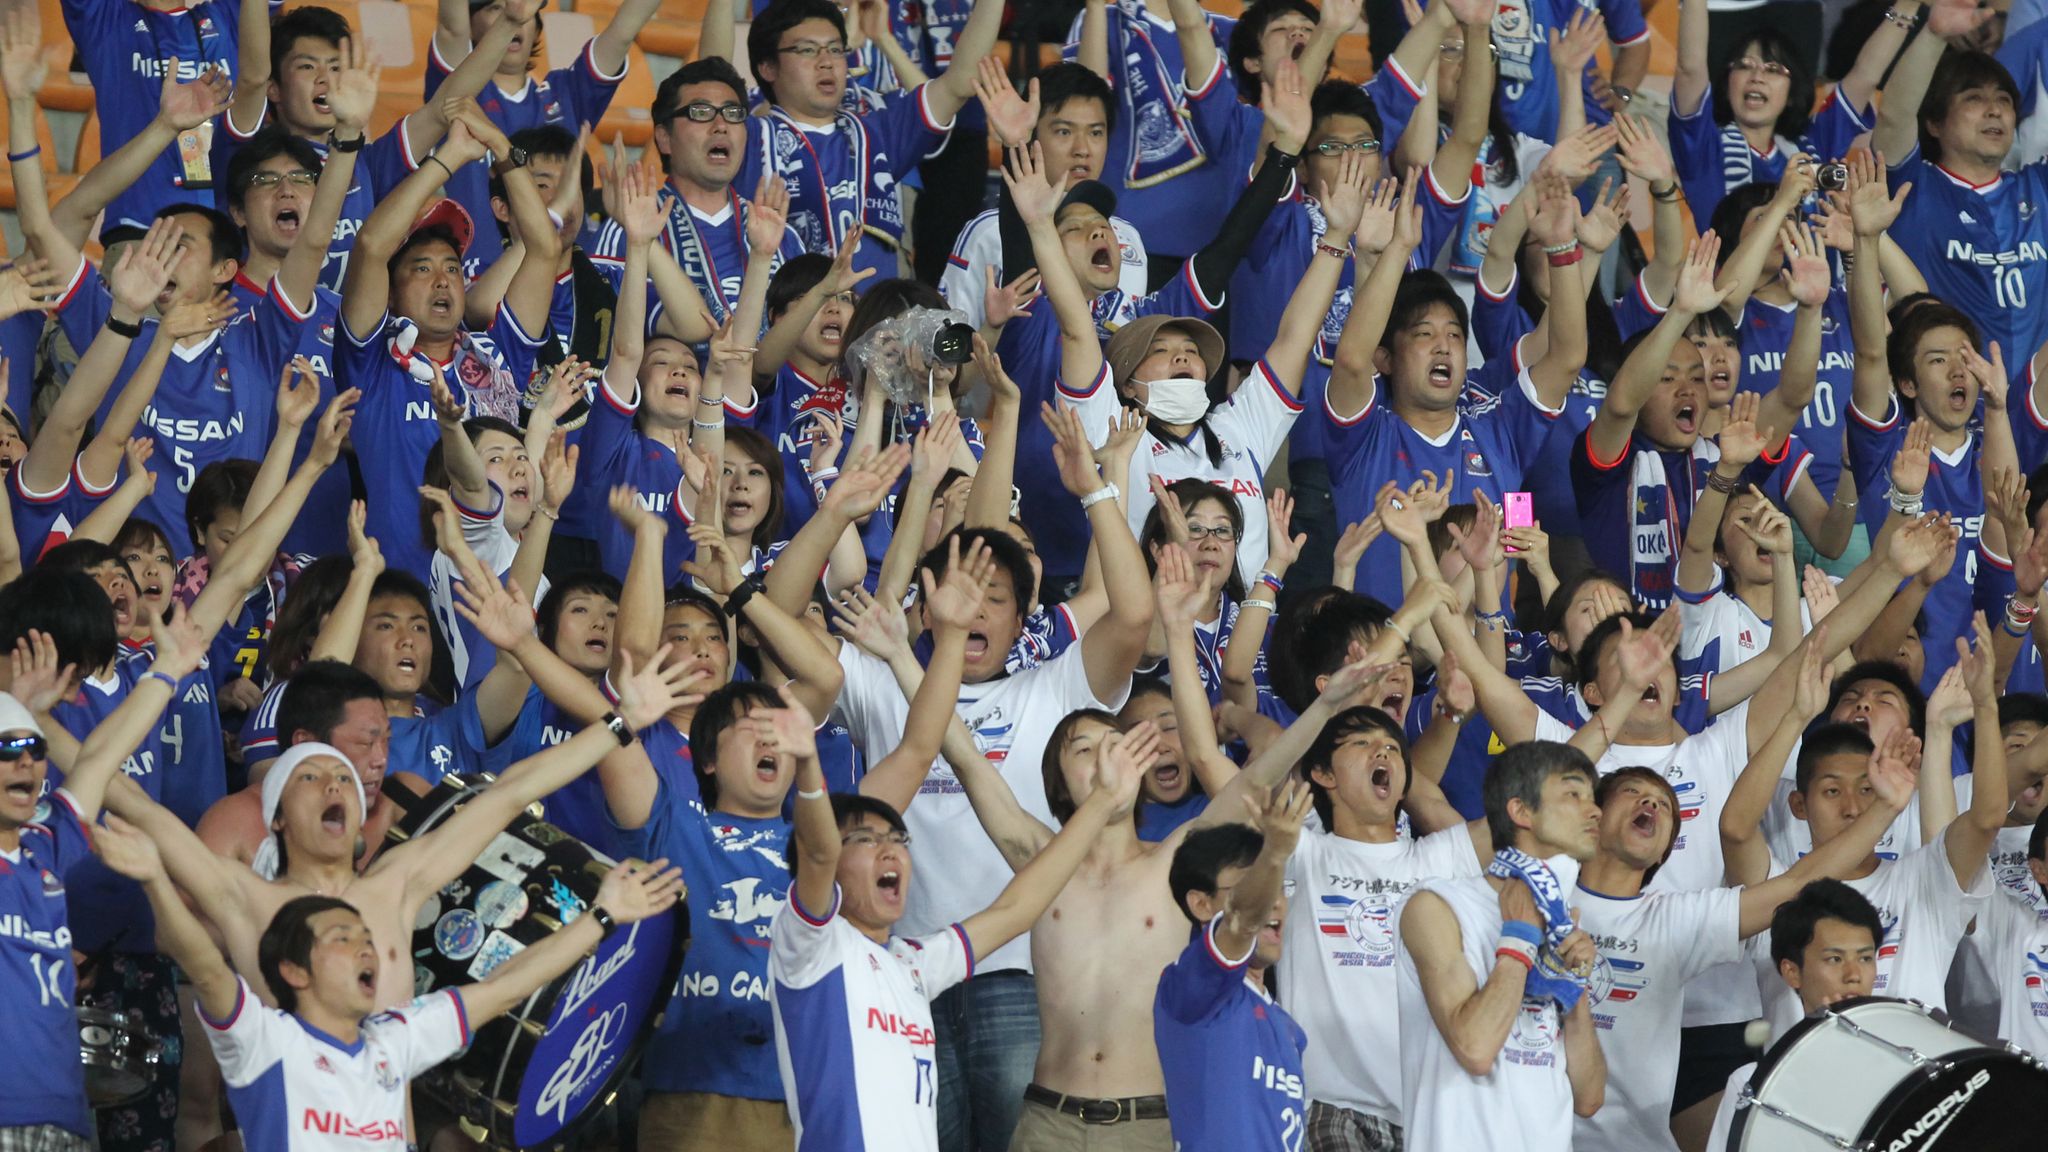 Manchester City to play Yokohama F. Marinos in first friendly in Japan